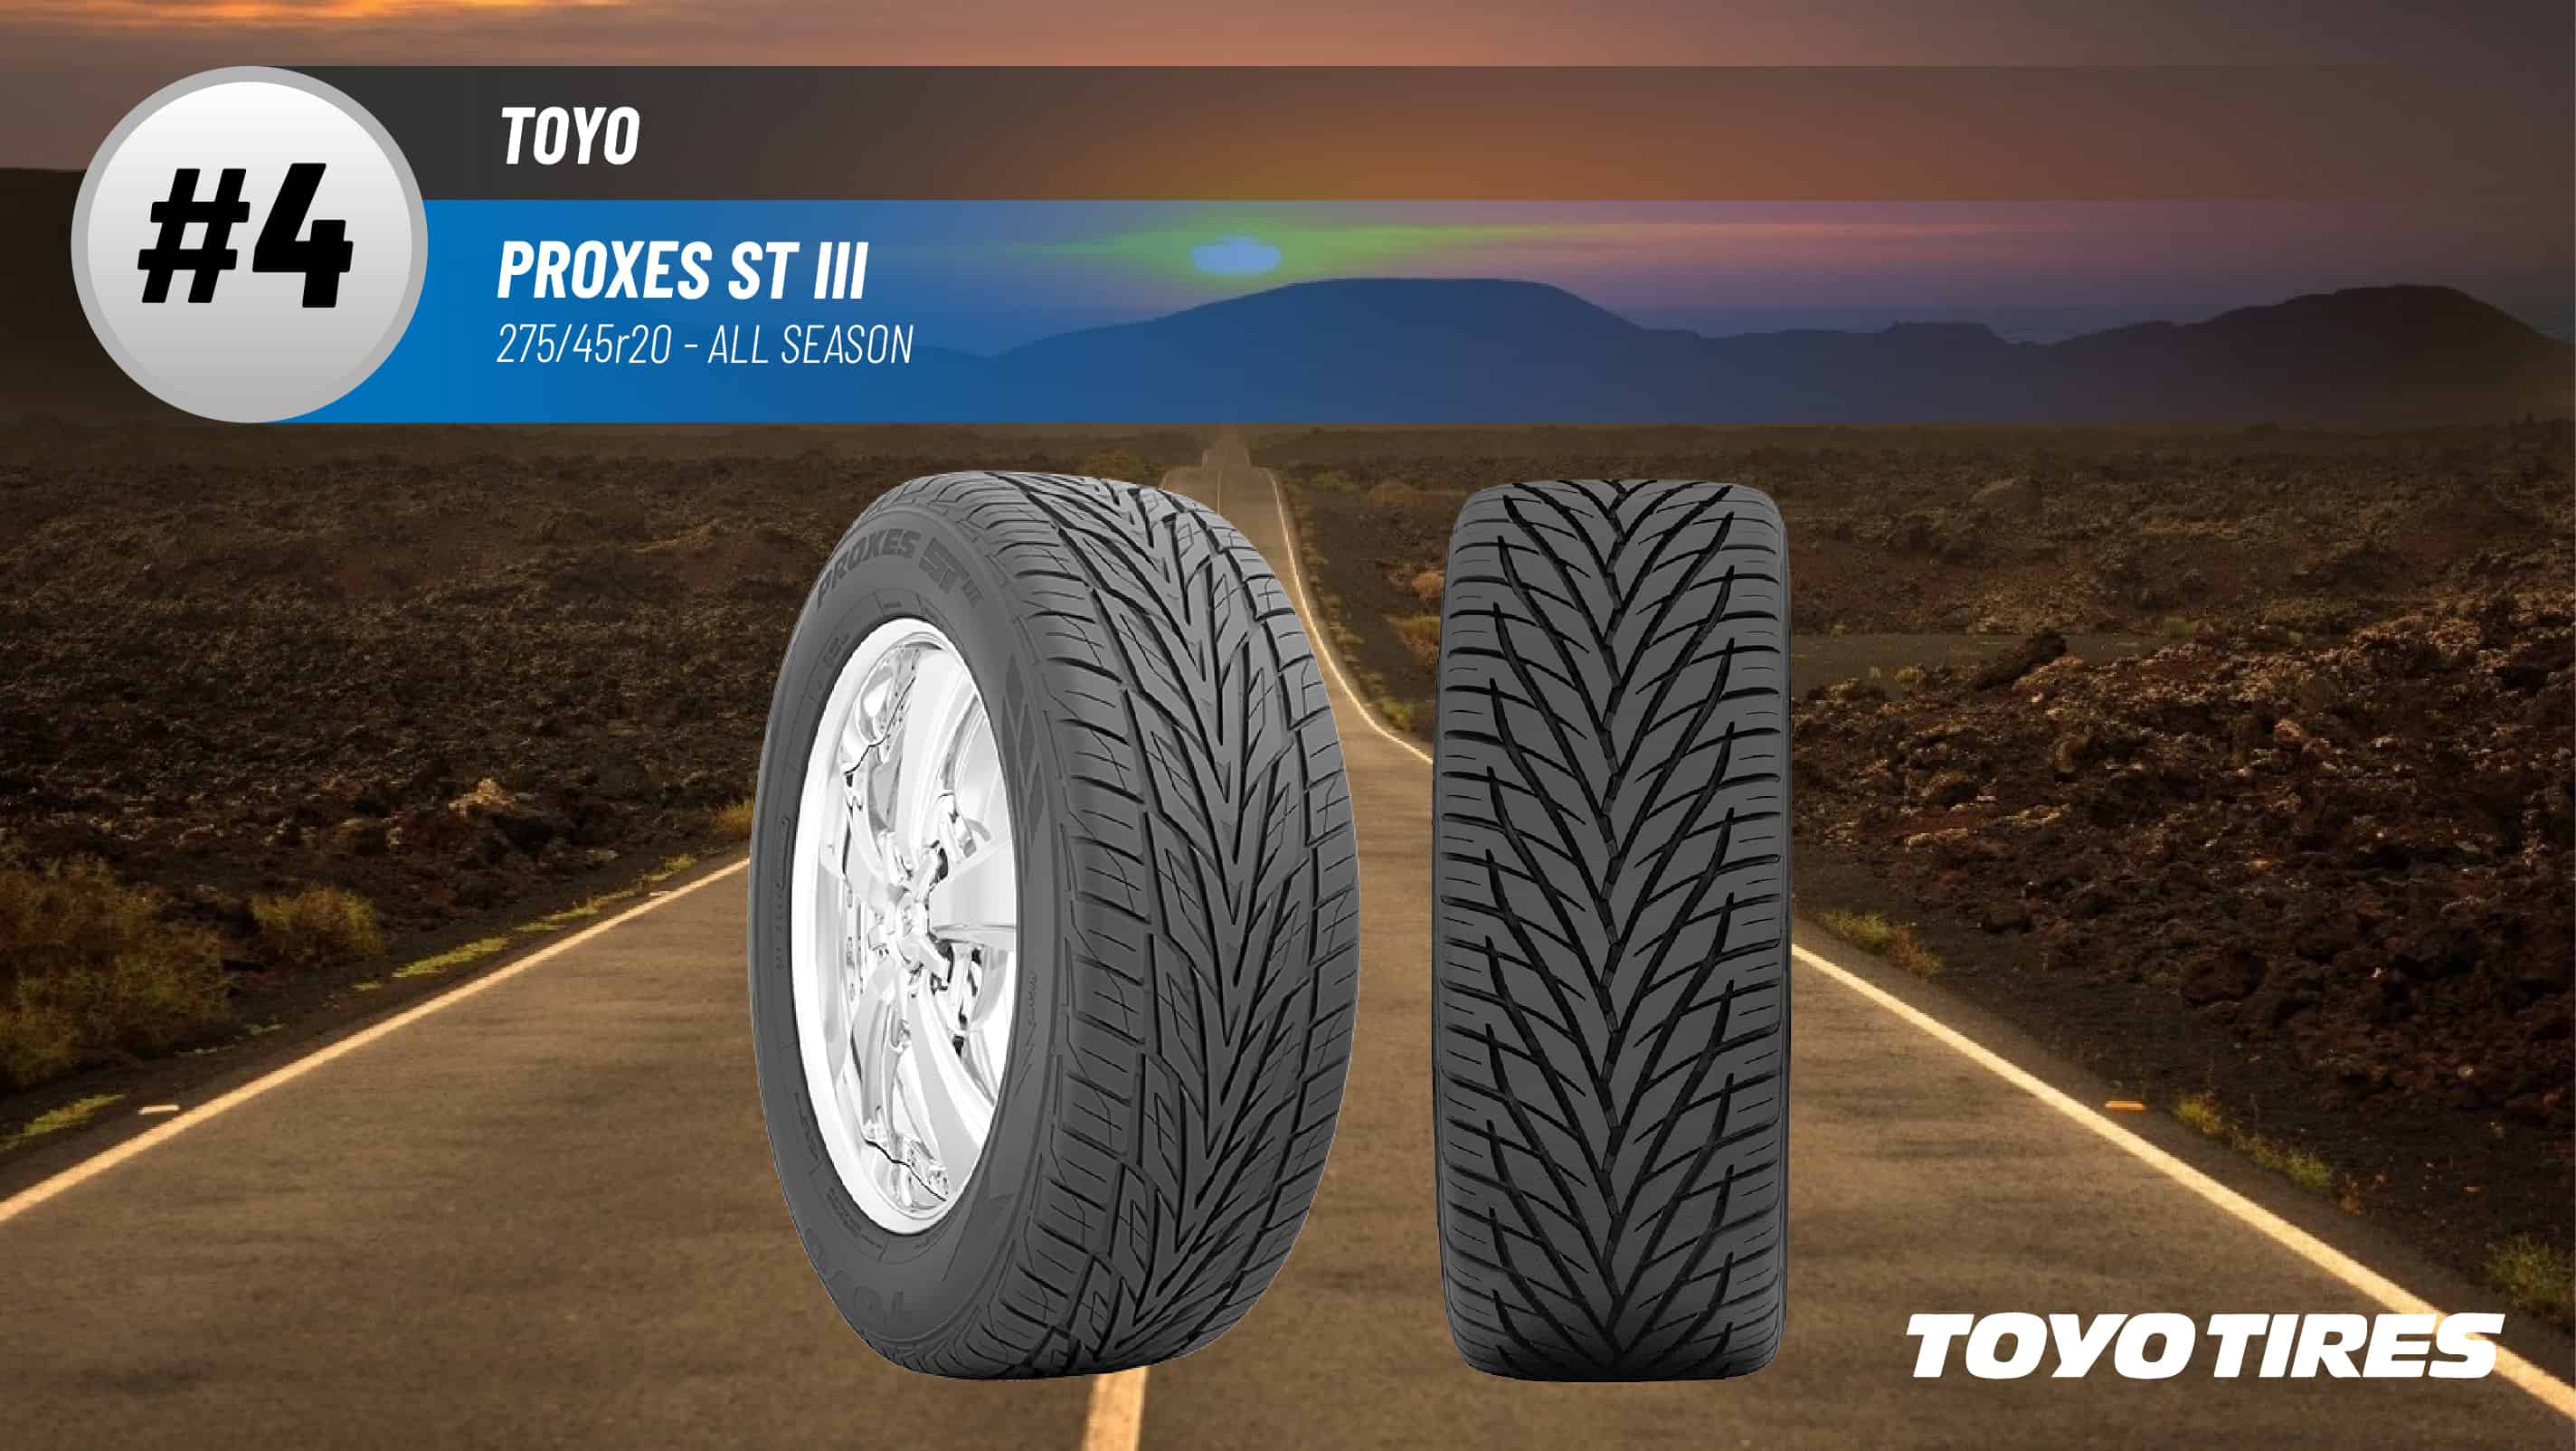 Top #4 All Season Tires: Toyo Proxes ST III – 275/45r20